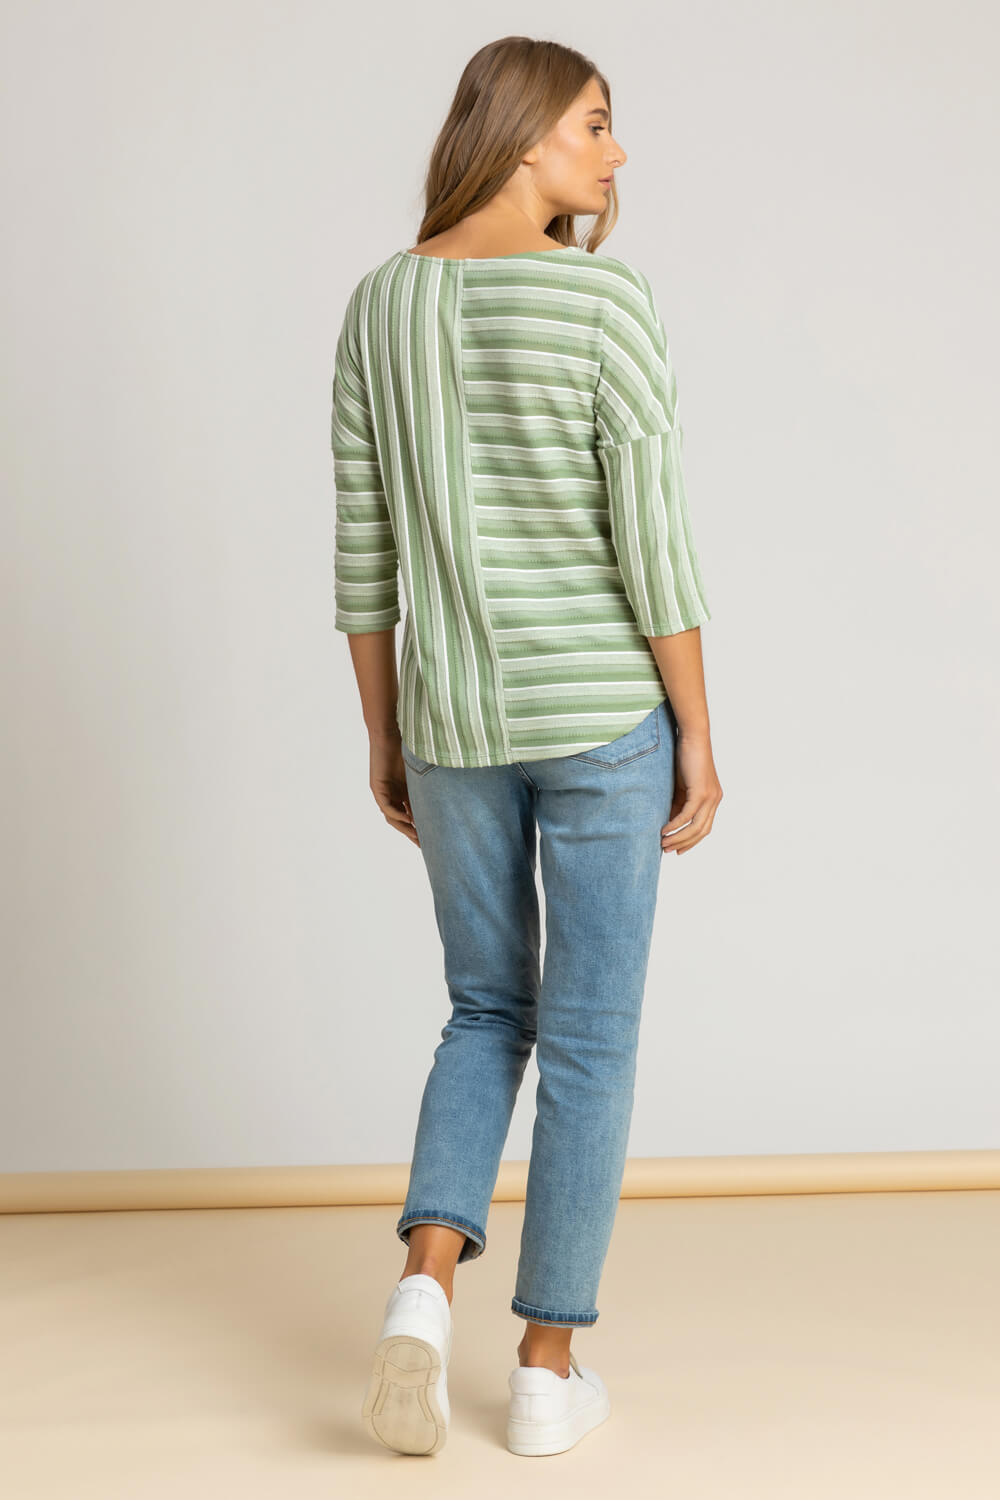 Green Textured Stripe Print Top, Image 2 of 4